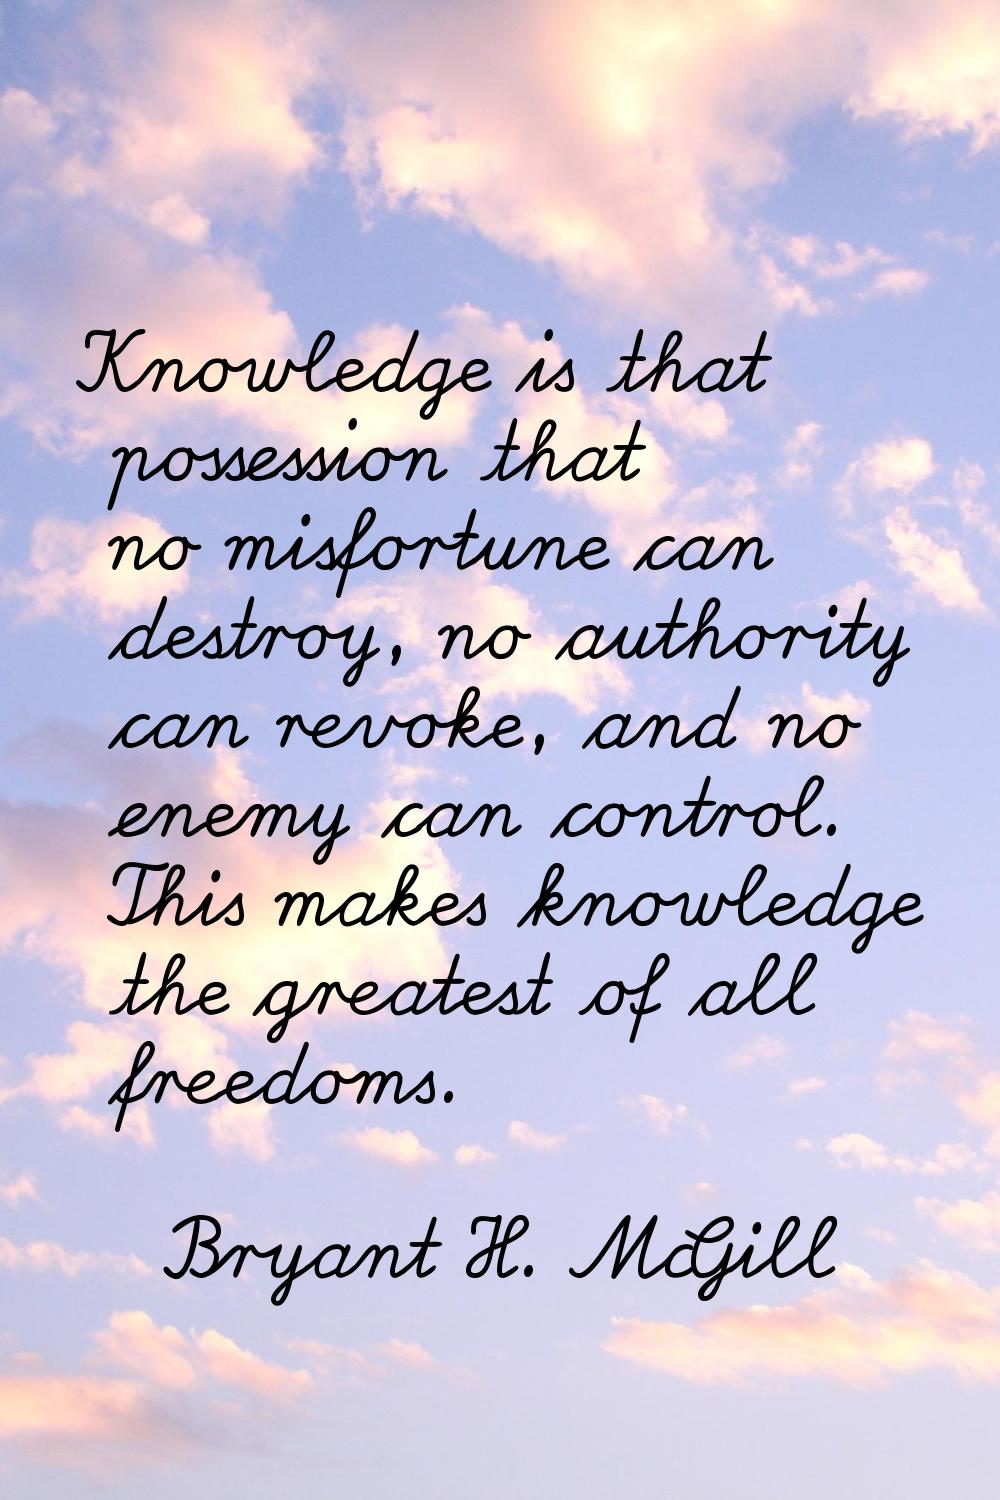 Knowledge is that possession that no misfortune can destroy, no authority can revoke, and no enemy 